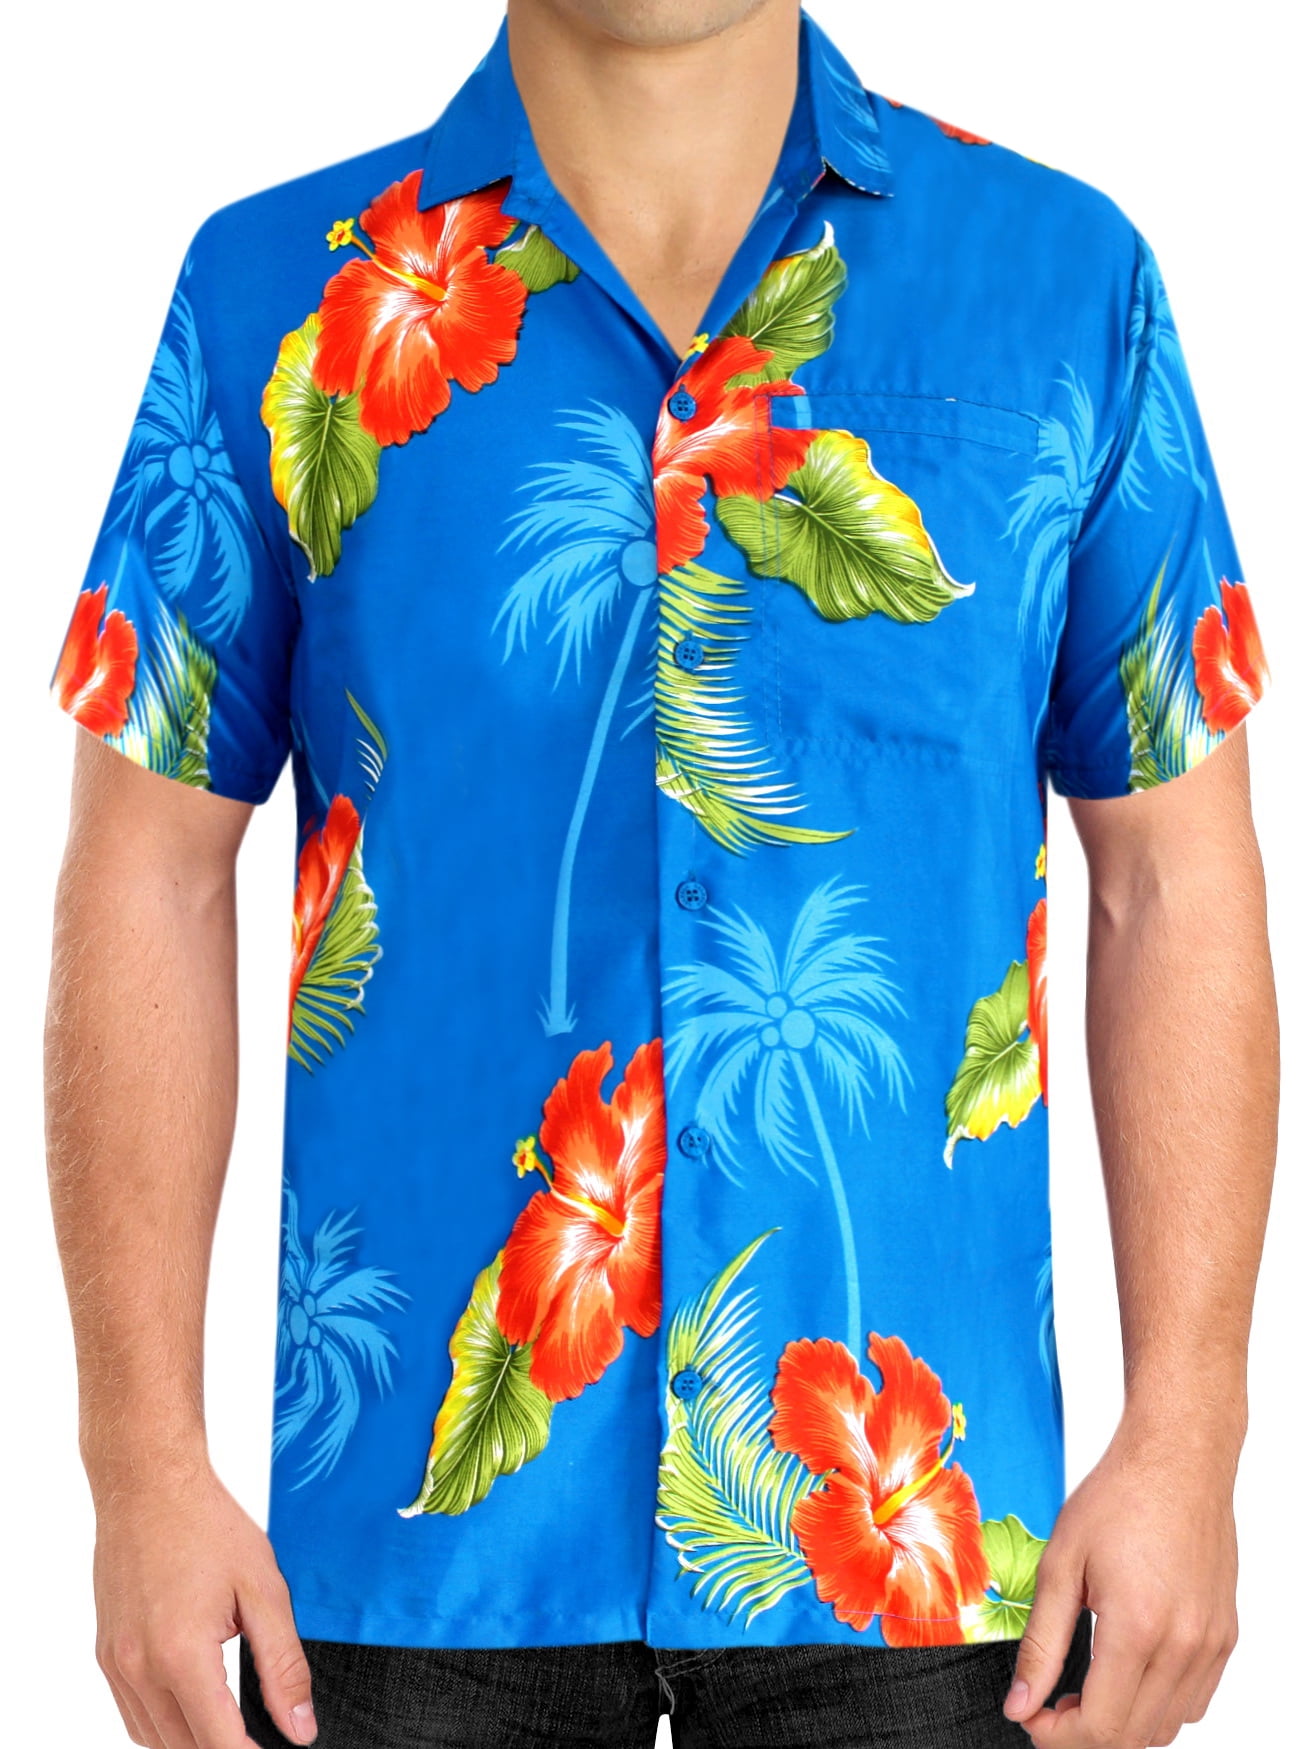 Mens Hawaiian Fancy Dress Tunic Shirt Adult Stag or Holiday M/L 40-44" Chest New 